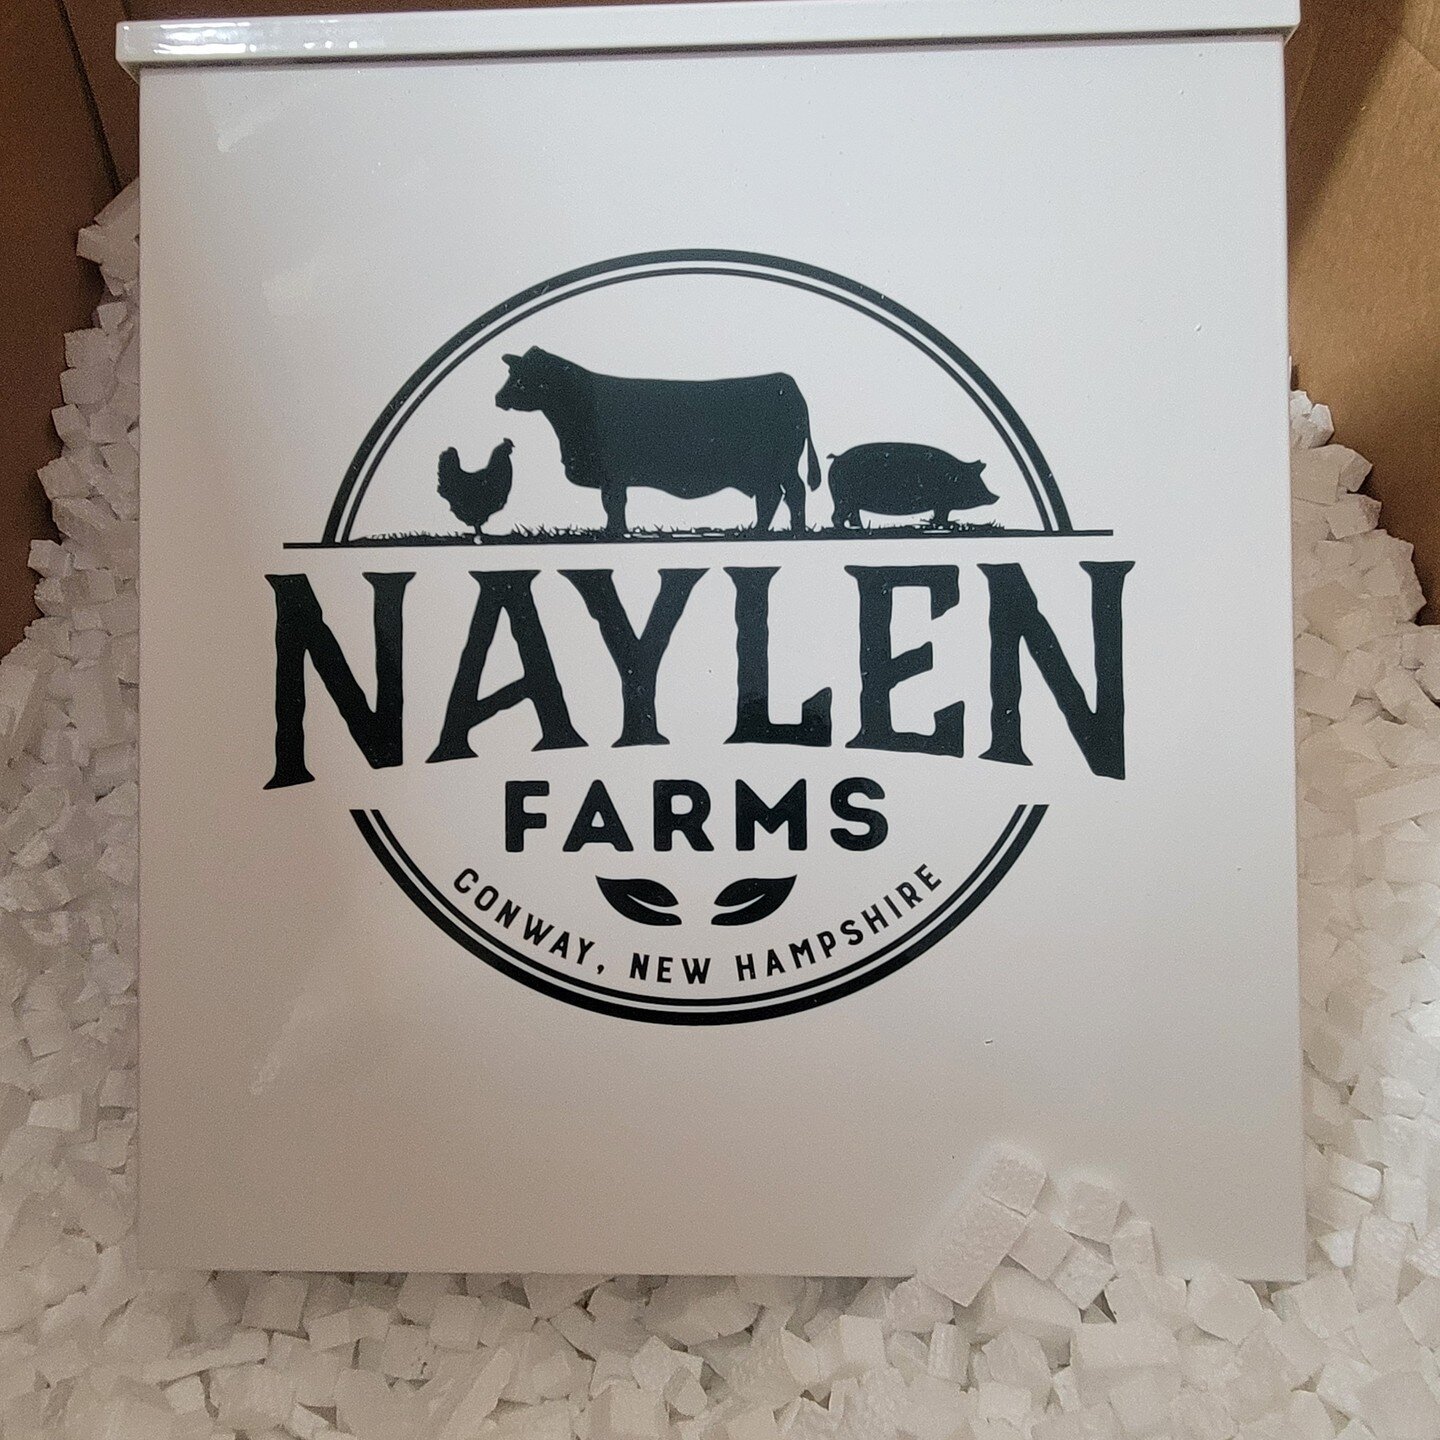 Naylen Farms is excited to announce the roll out of our porch box program. These insulated porch boxes can be leased from us for a completely refundable deposit of $75.00. They are great for receiving delivery of our products, keeping your items cold